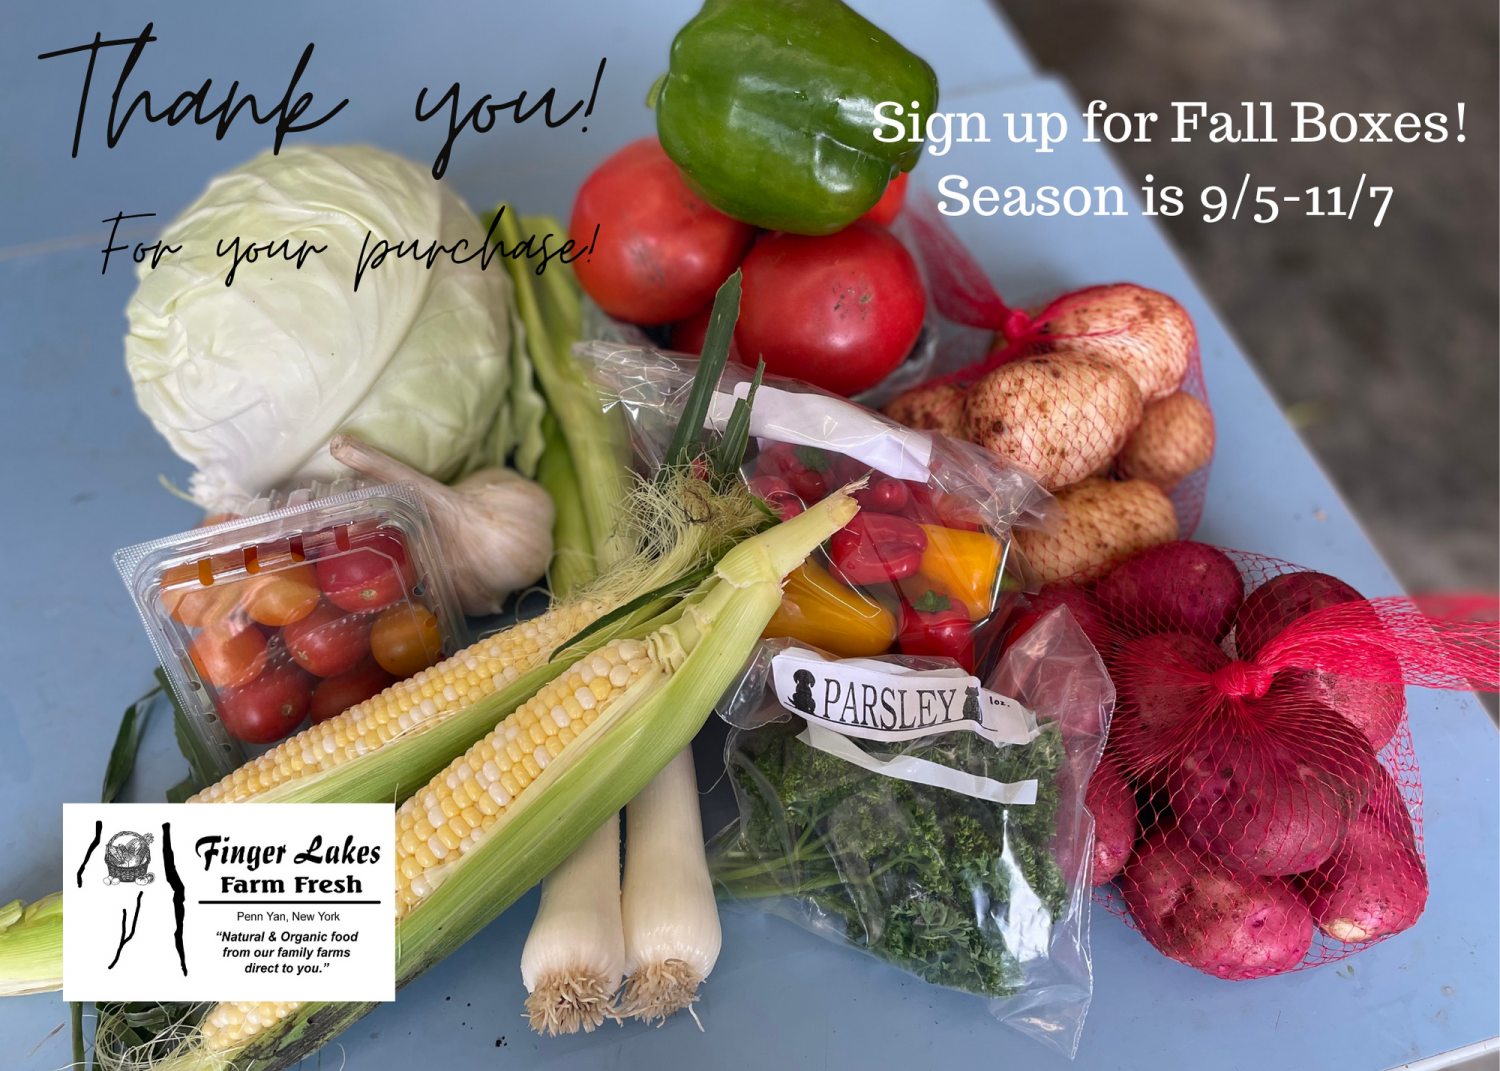 Previous Happening: Fall is in the air!  Are you signed up to keep getting Veggies!?